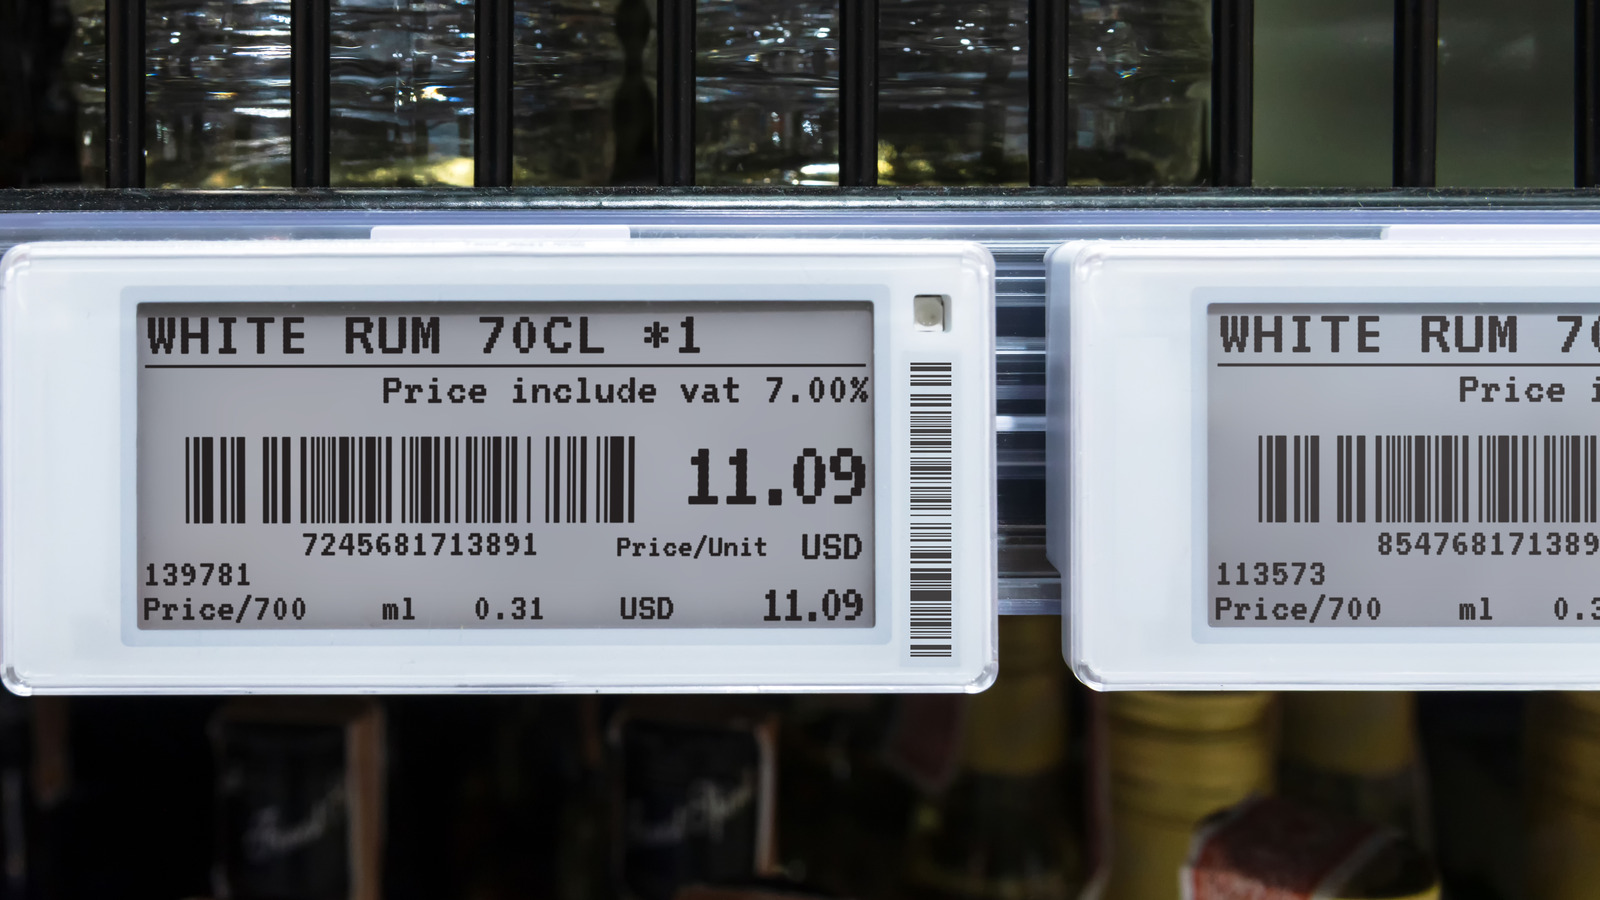 https://www.thedailymeal.com/img/gallery/how-to-read-unit-price-labels-at-the-grocery-store-for-smarter-shopping/l-intro-1682180985.jpg